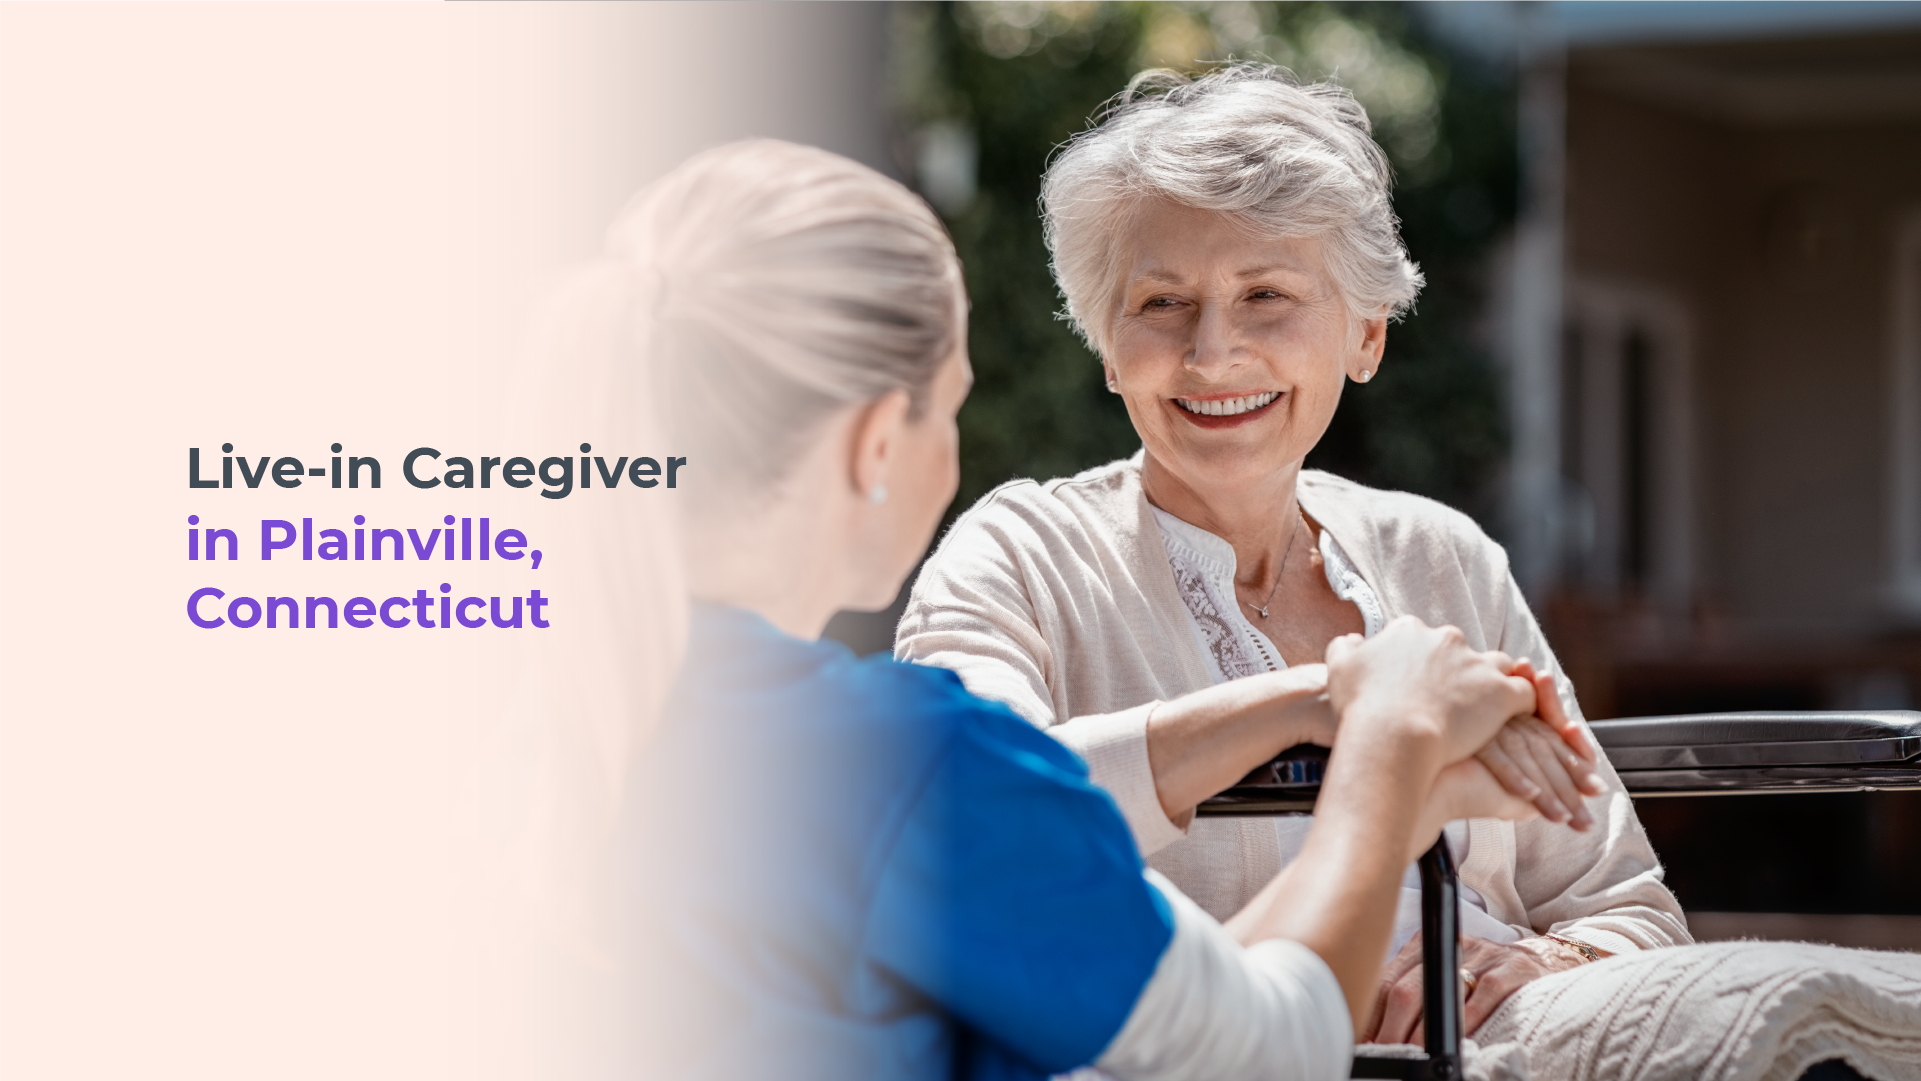 Live-in Caregivers in Plainville